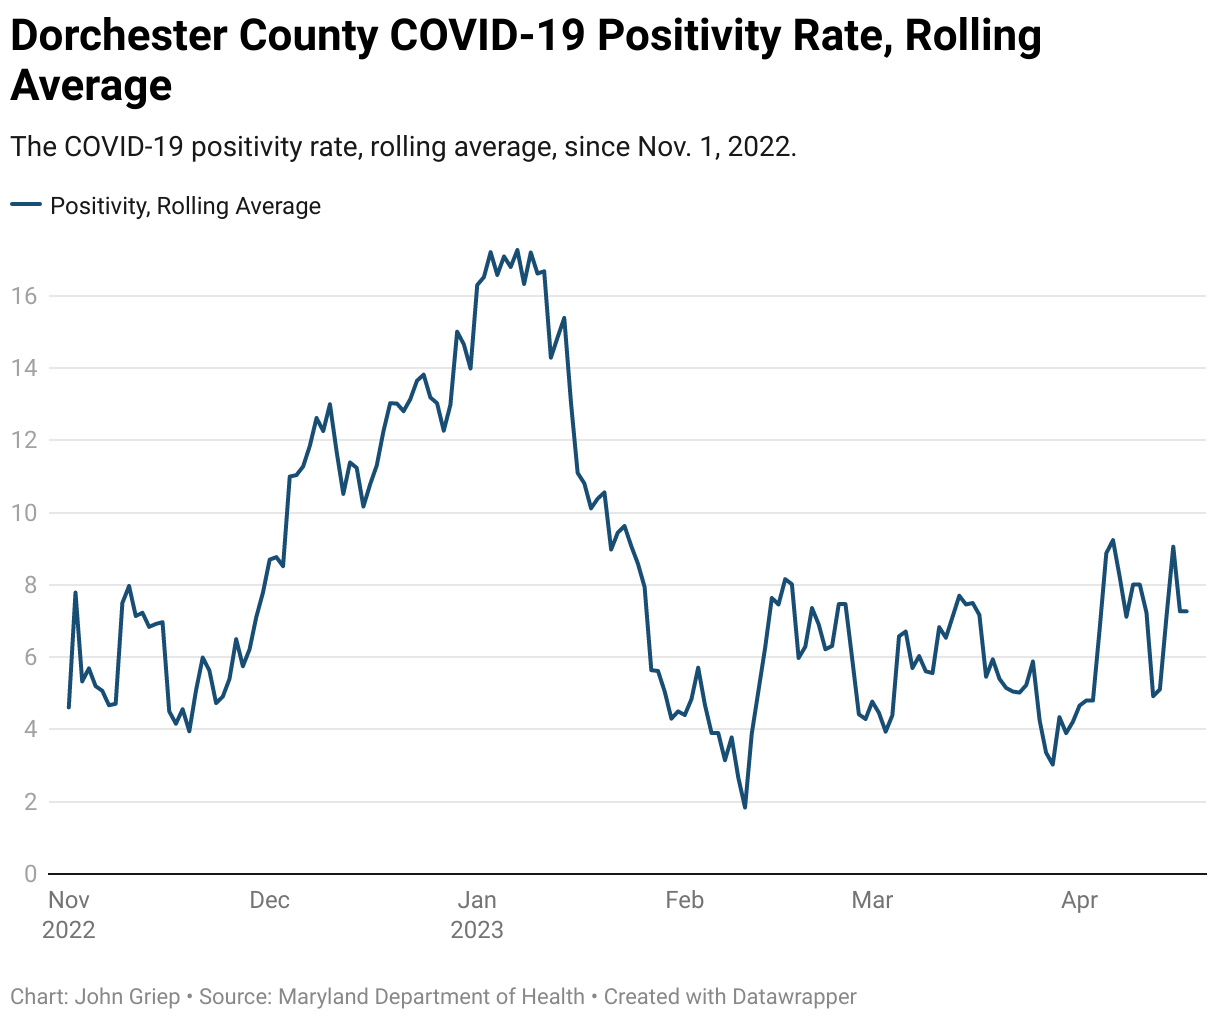 A line chart showing the rolling average COVID-19 positivity rate for Dorchester County from Oct. 1, 2022, until the present.